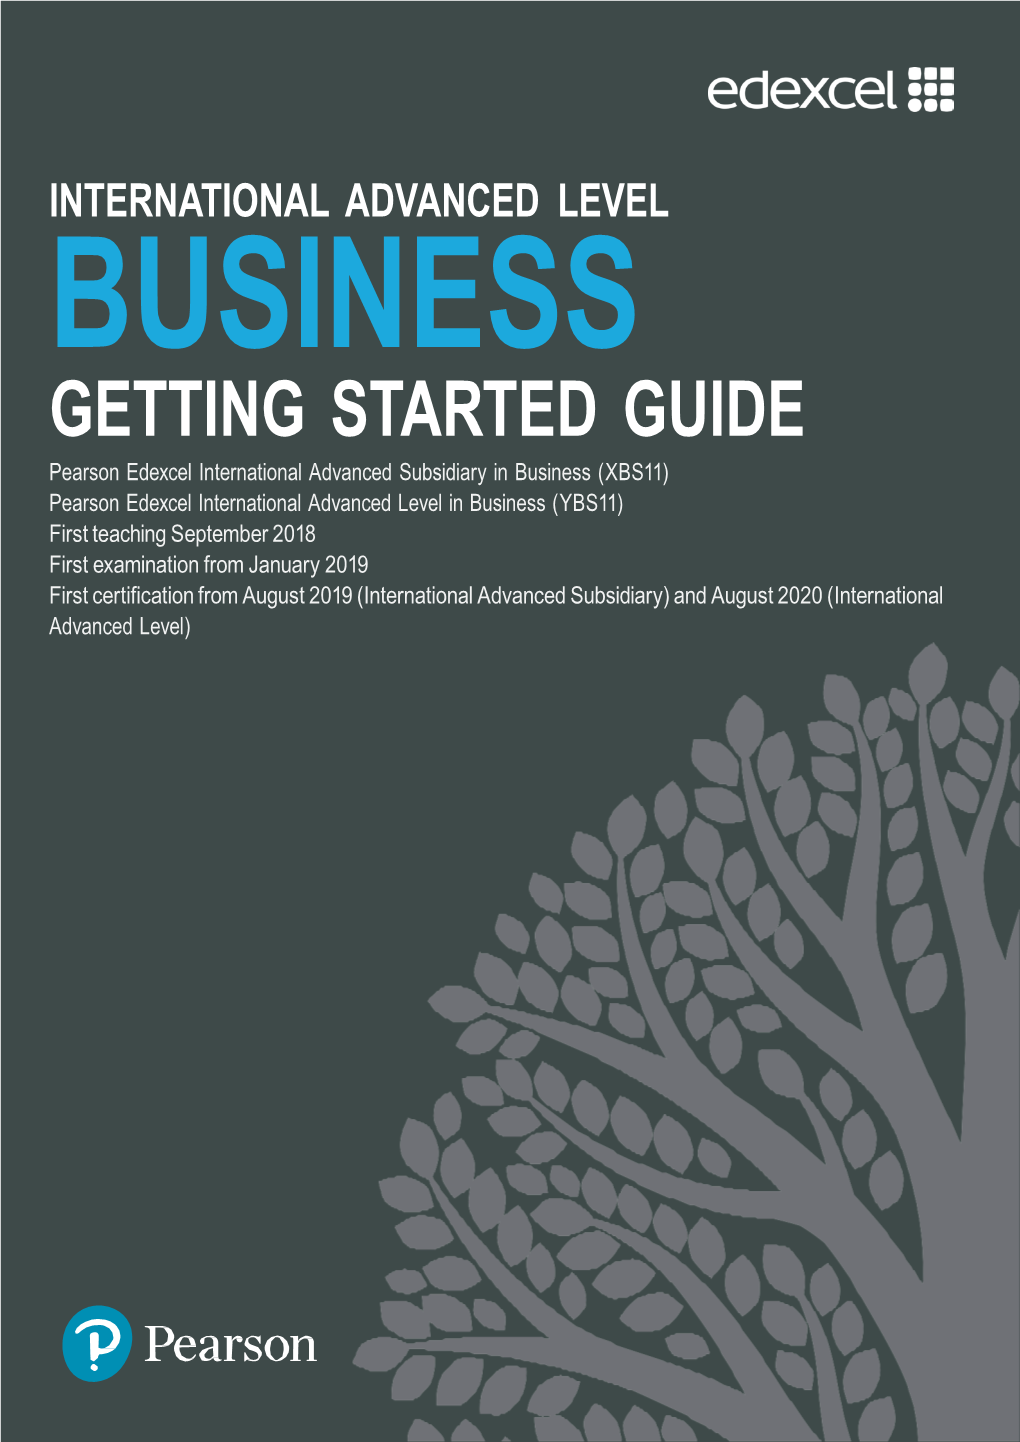 IAL Business Getting Started Guide.Pdf